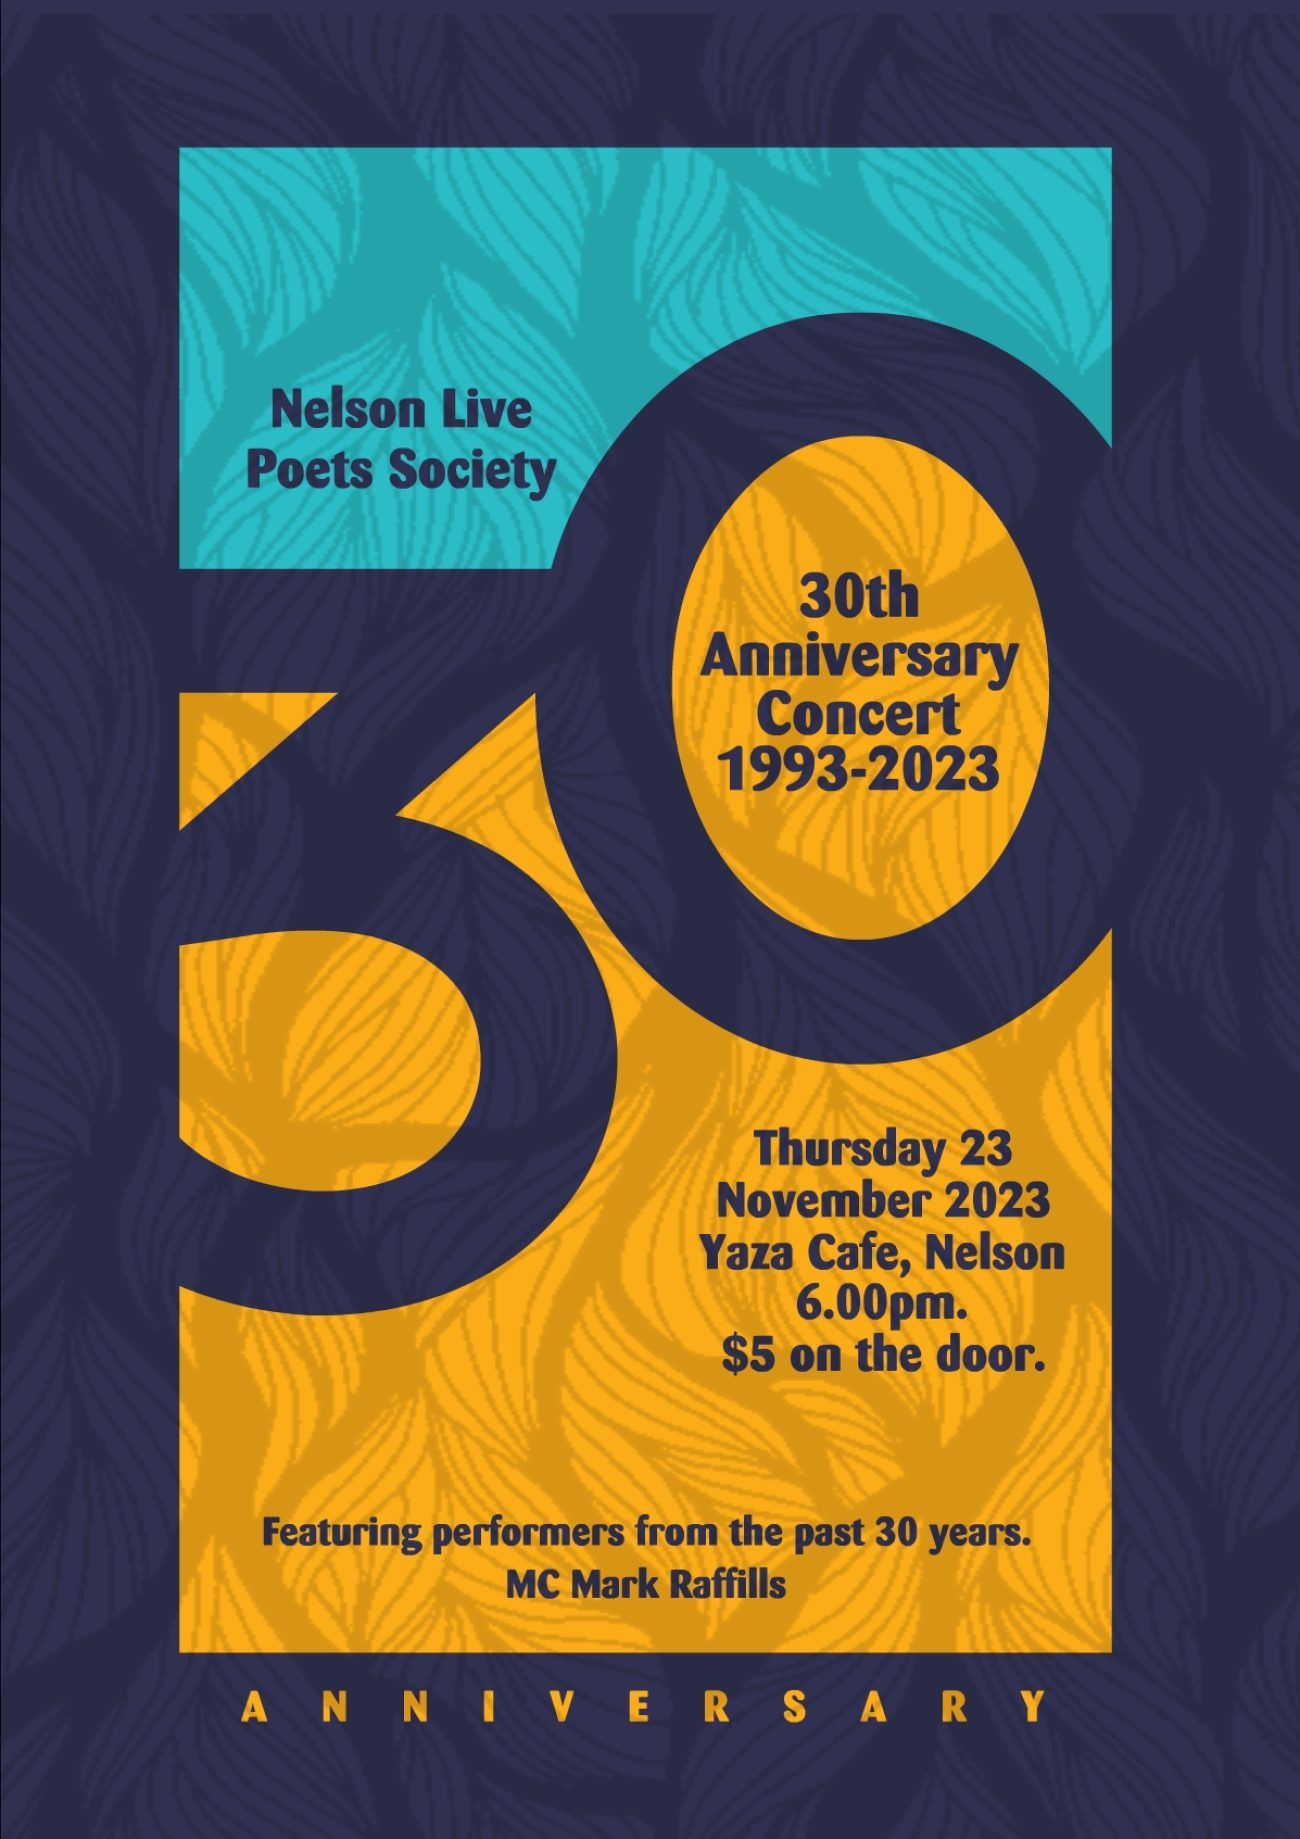 NELSON LIVE POETS 30TH ANNIVERSARY